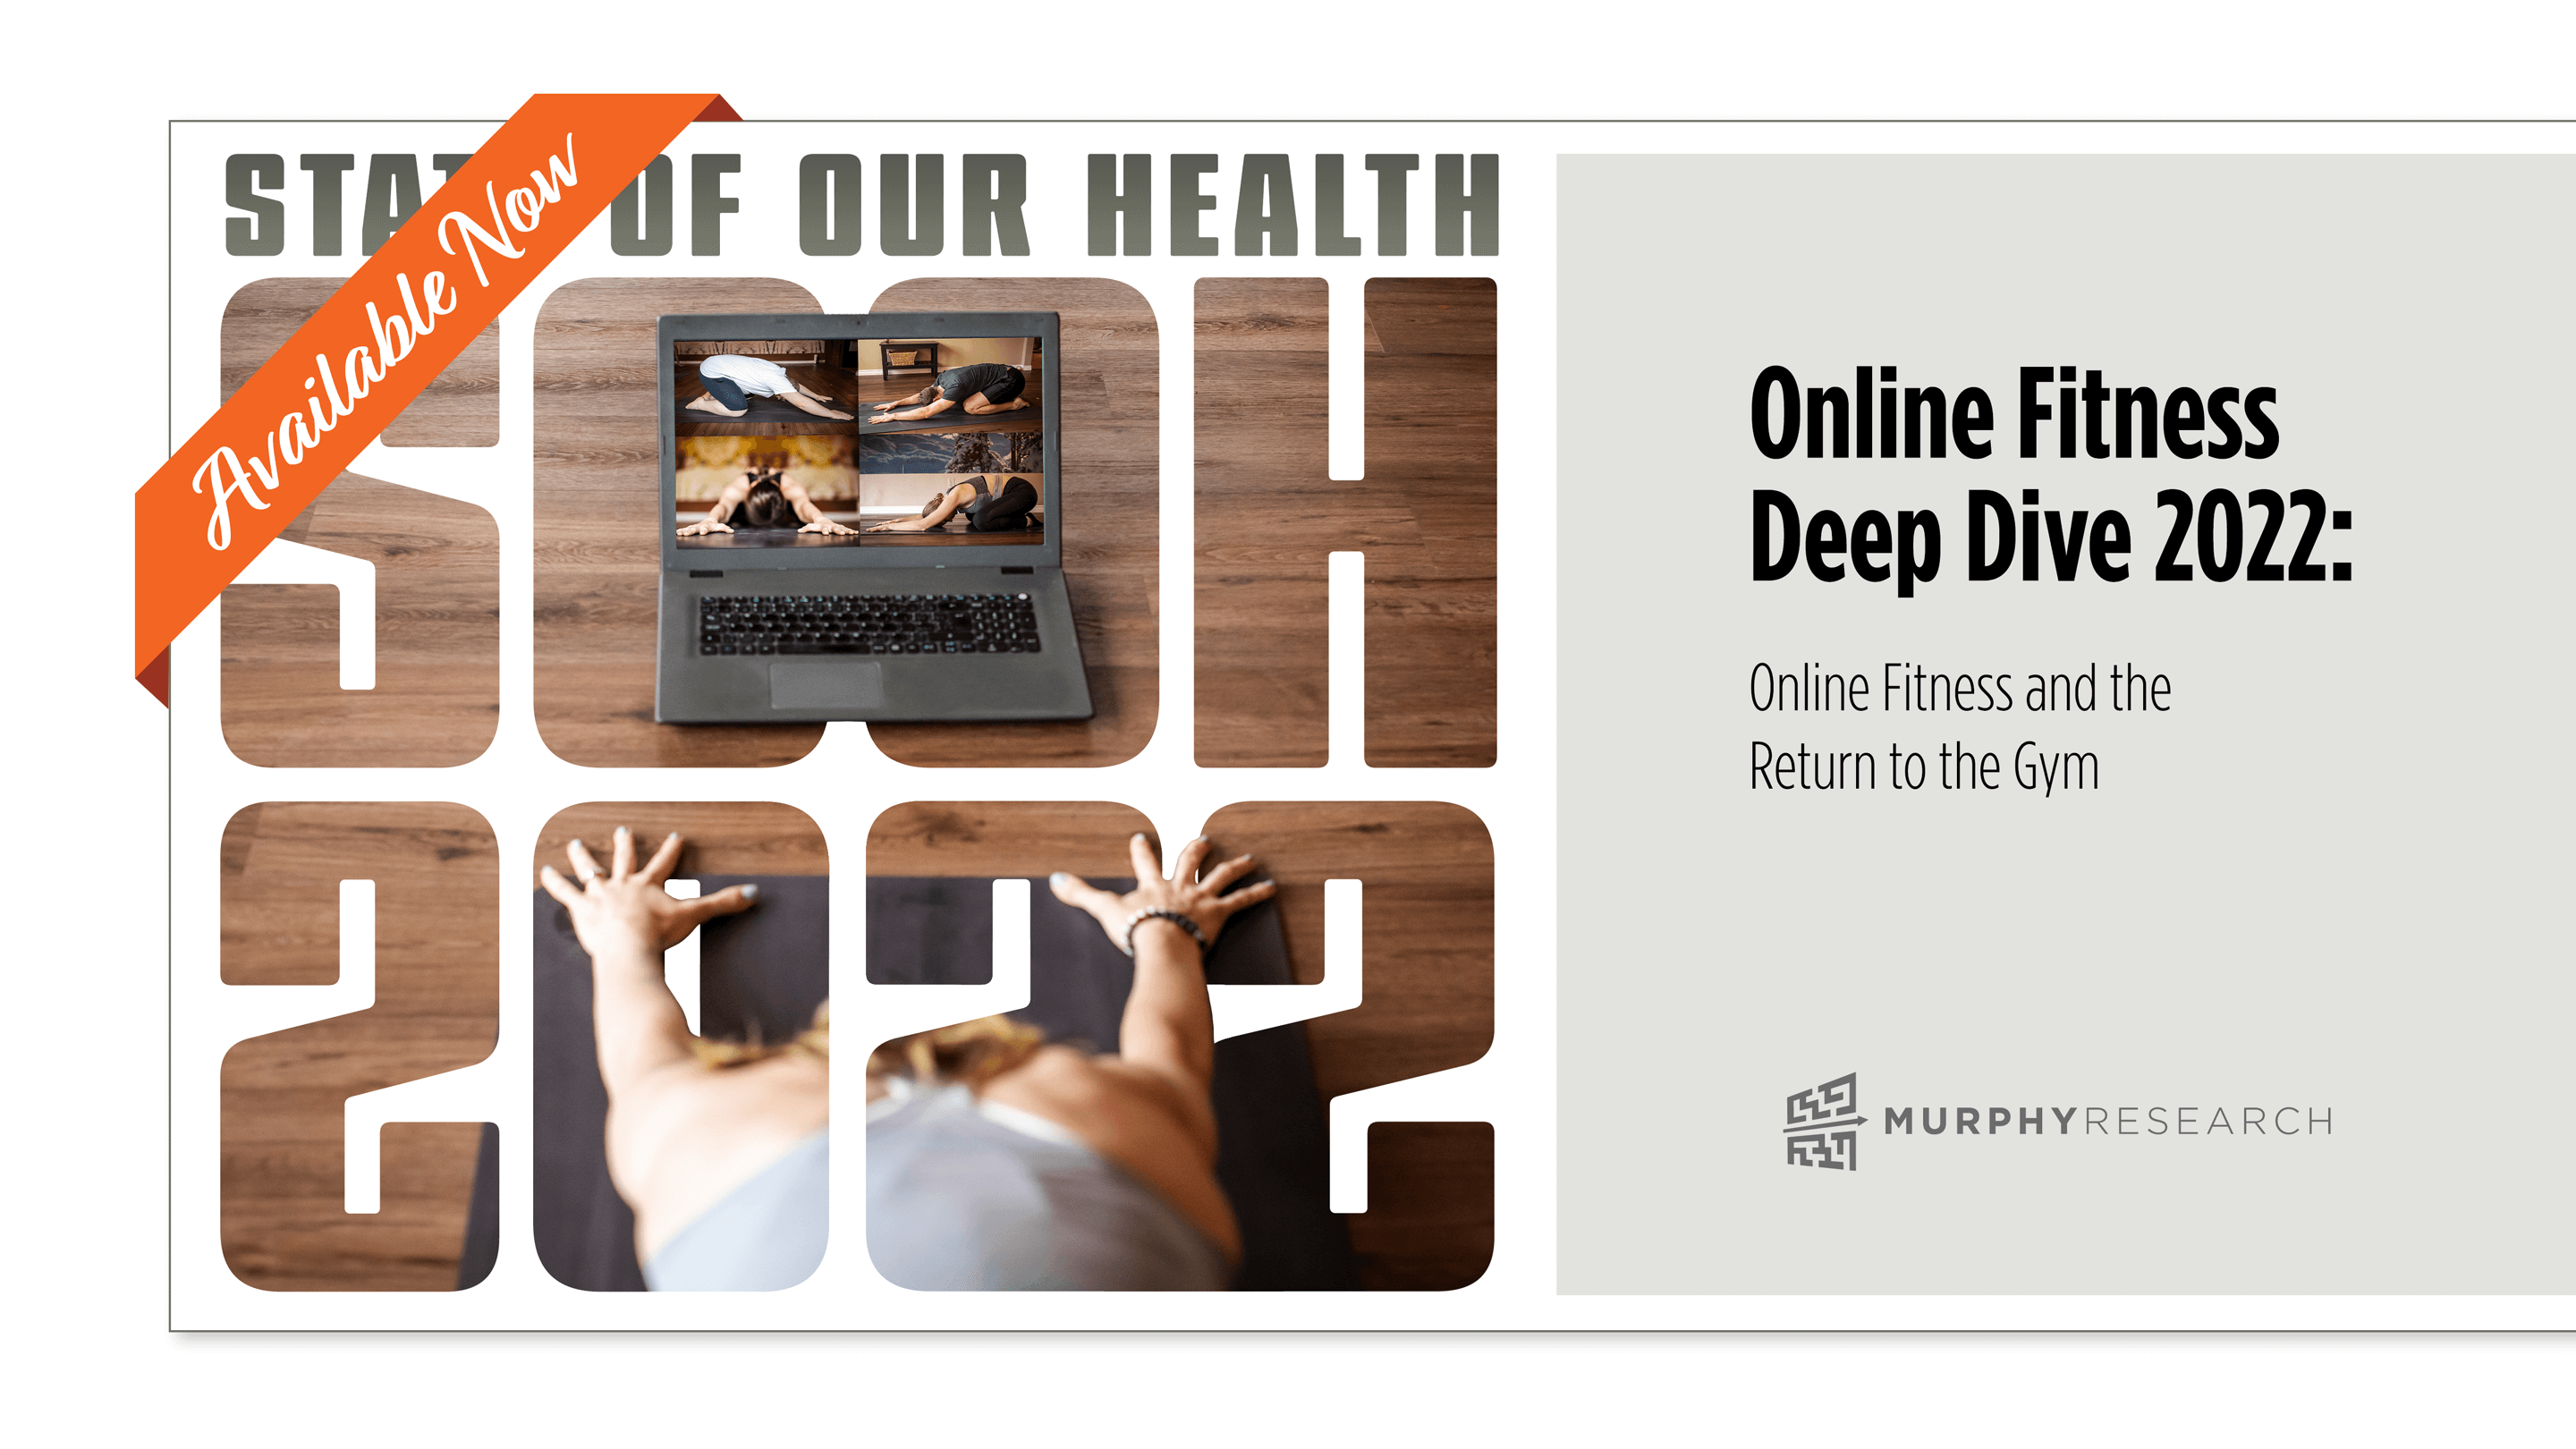 Online Fitness Deep Dive 2022: Online Fitness and the Return to the Gym